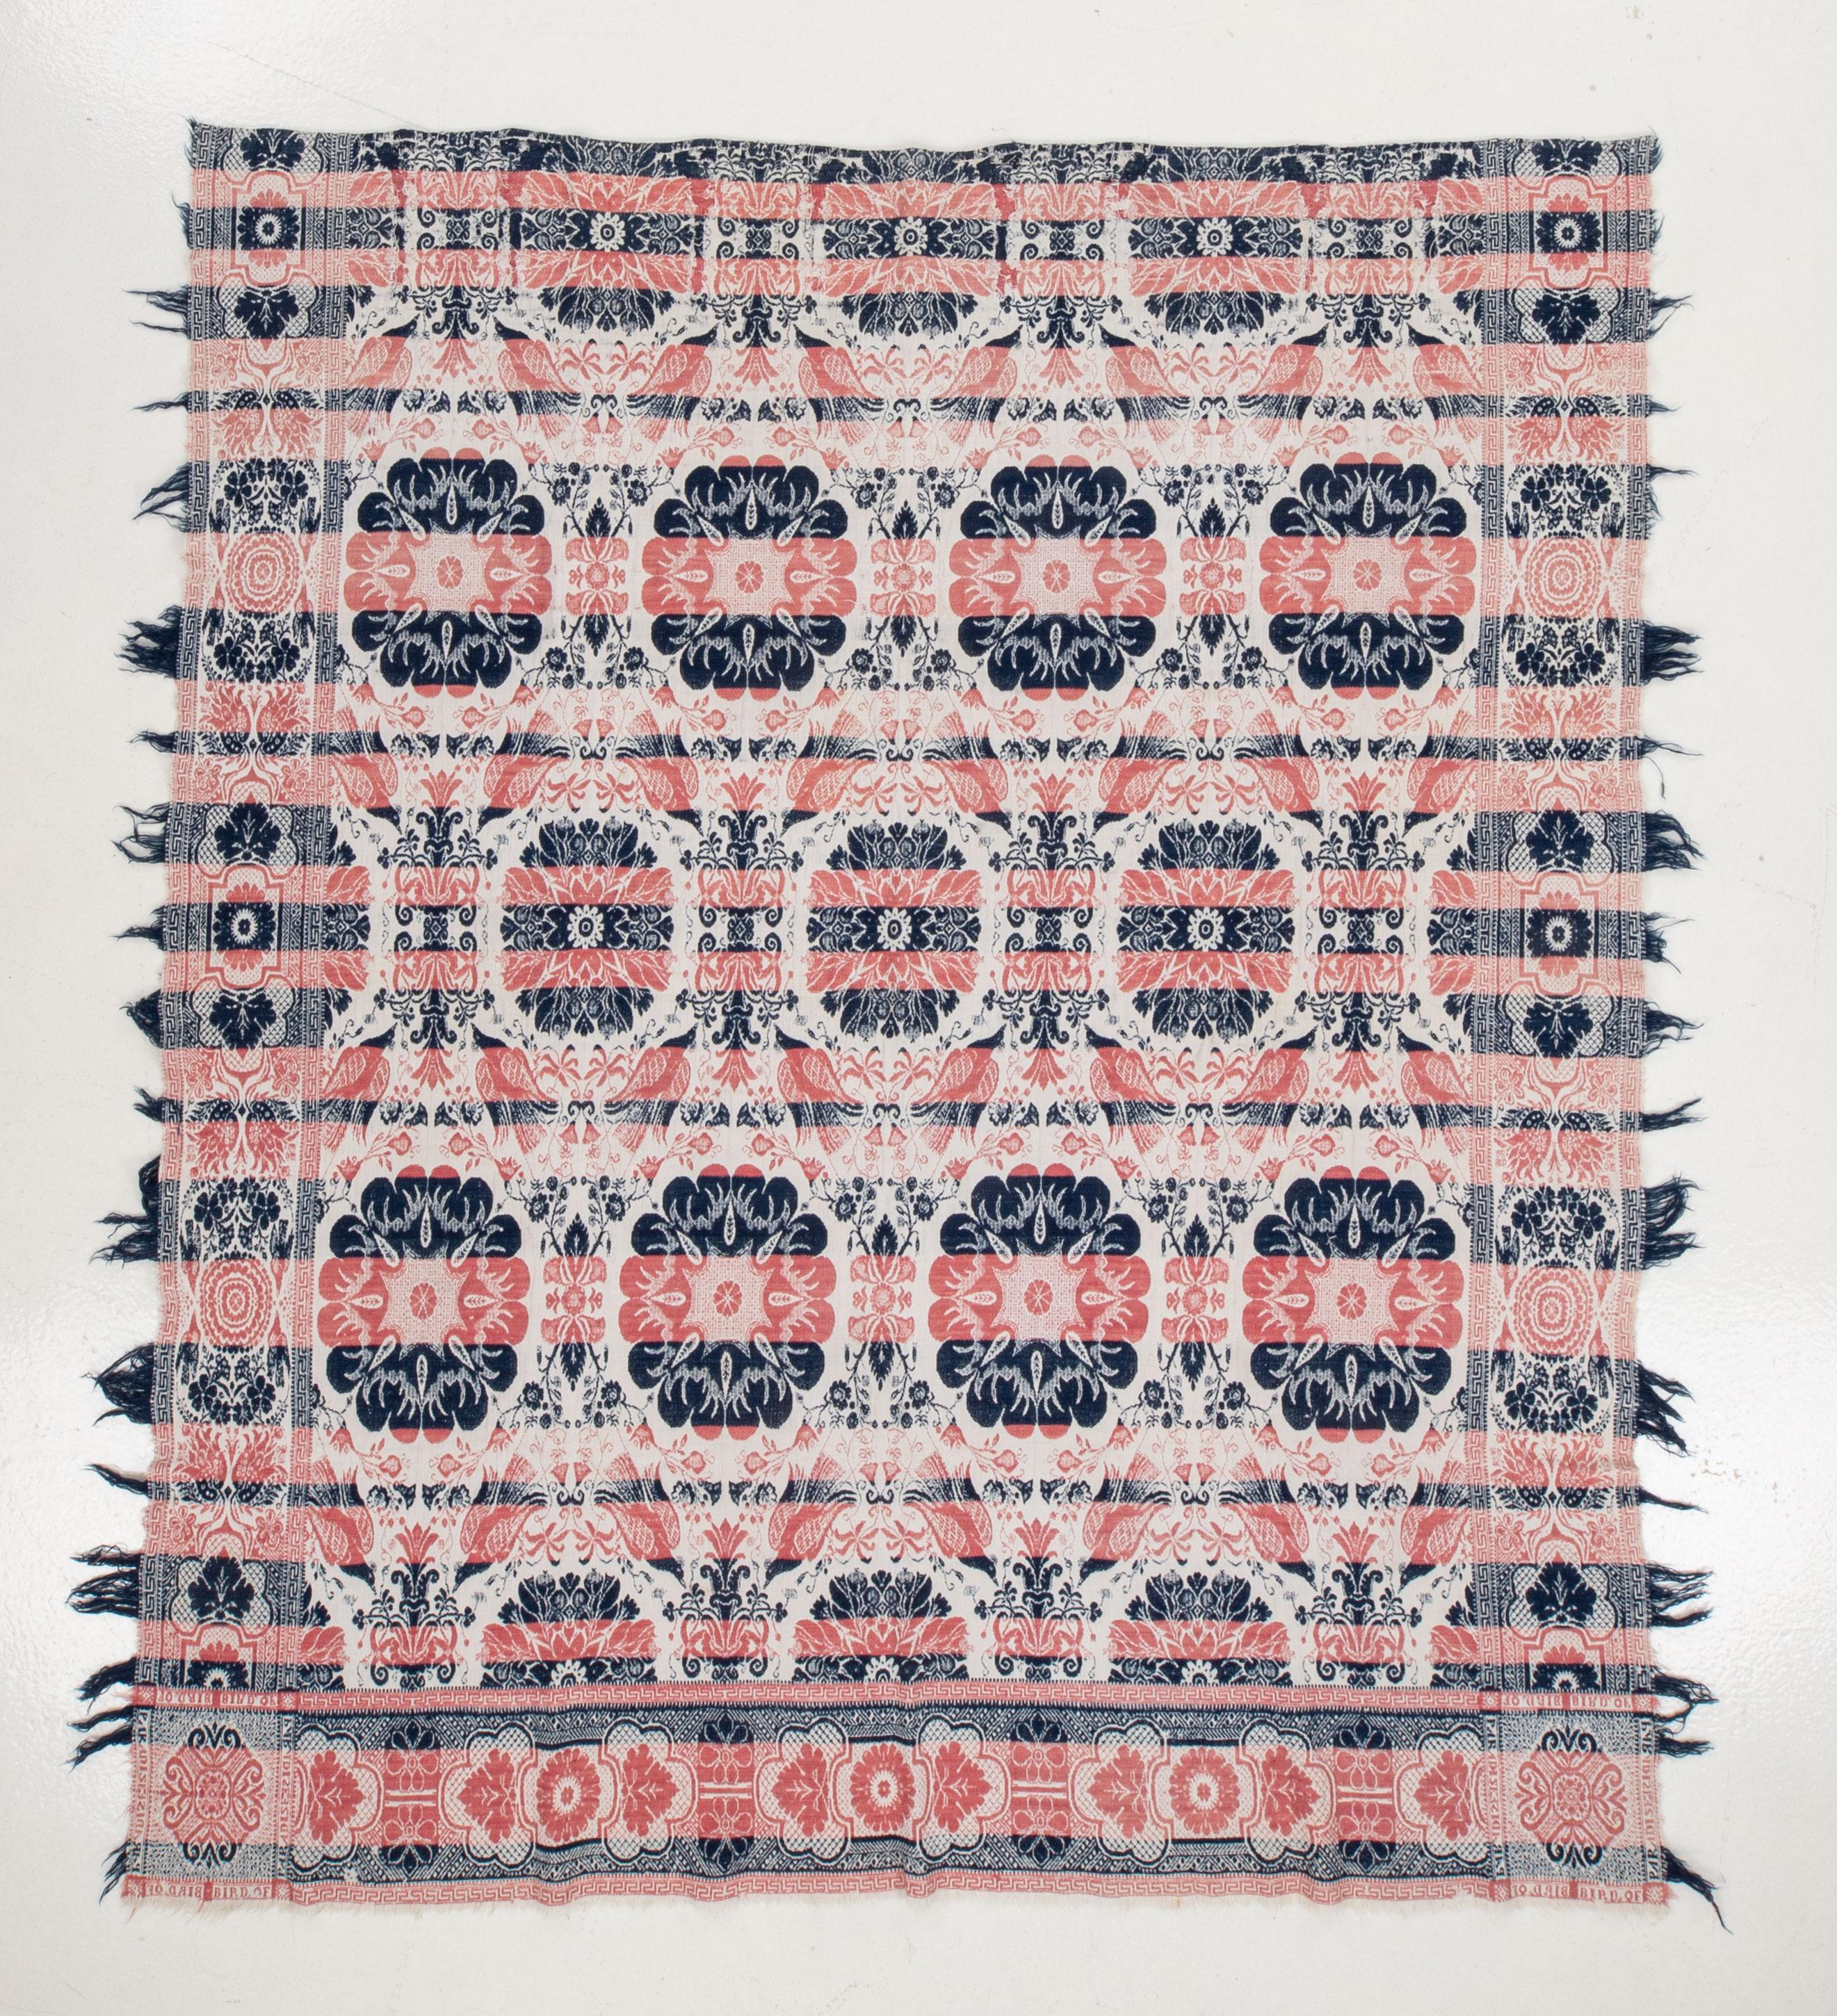 An American coverlet with some ware due to age and use with a dames design called 'bird of paradise'.
American coverlets are woven bed coverings that have a rich history in the United States. They were widely popular from the late 18th century